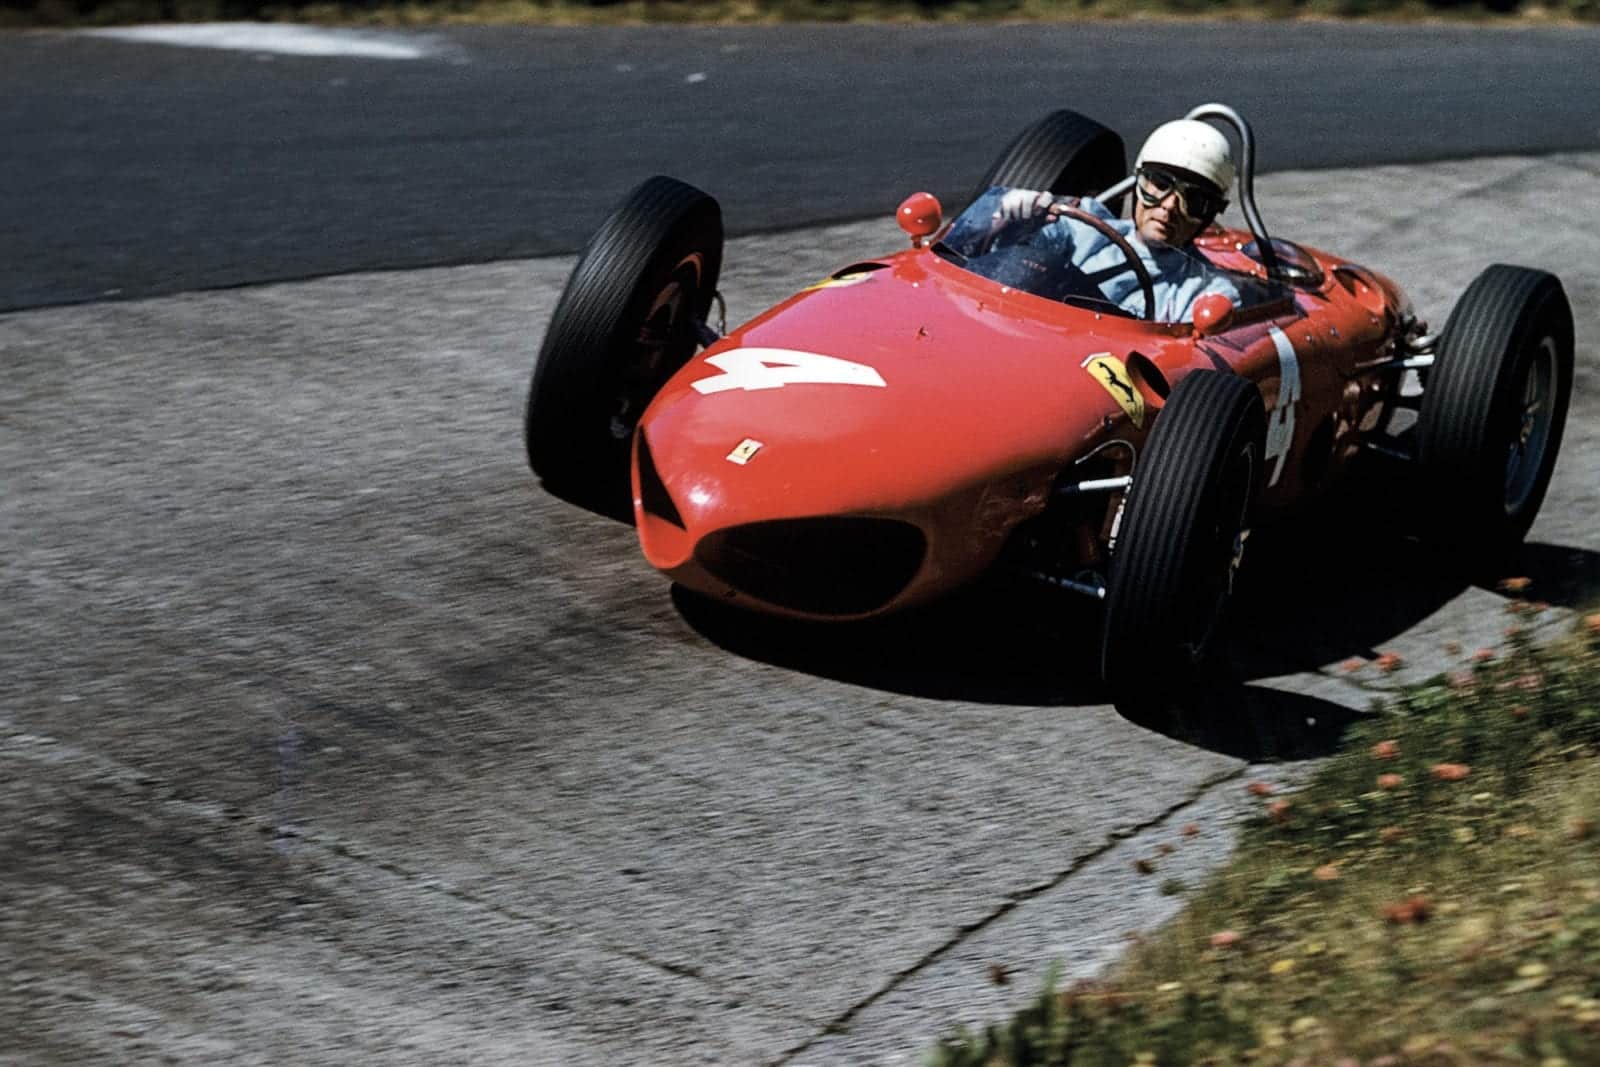 Phil Hill in the Ferrari 156 at the Karussell on the Nurburgring in 1961